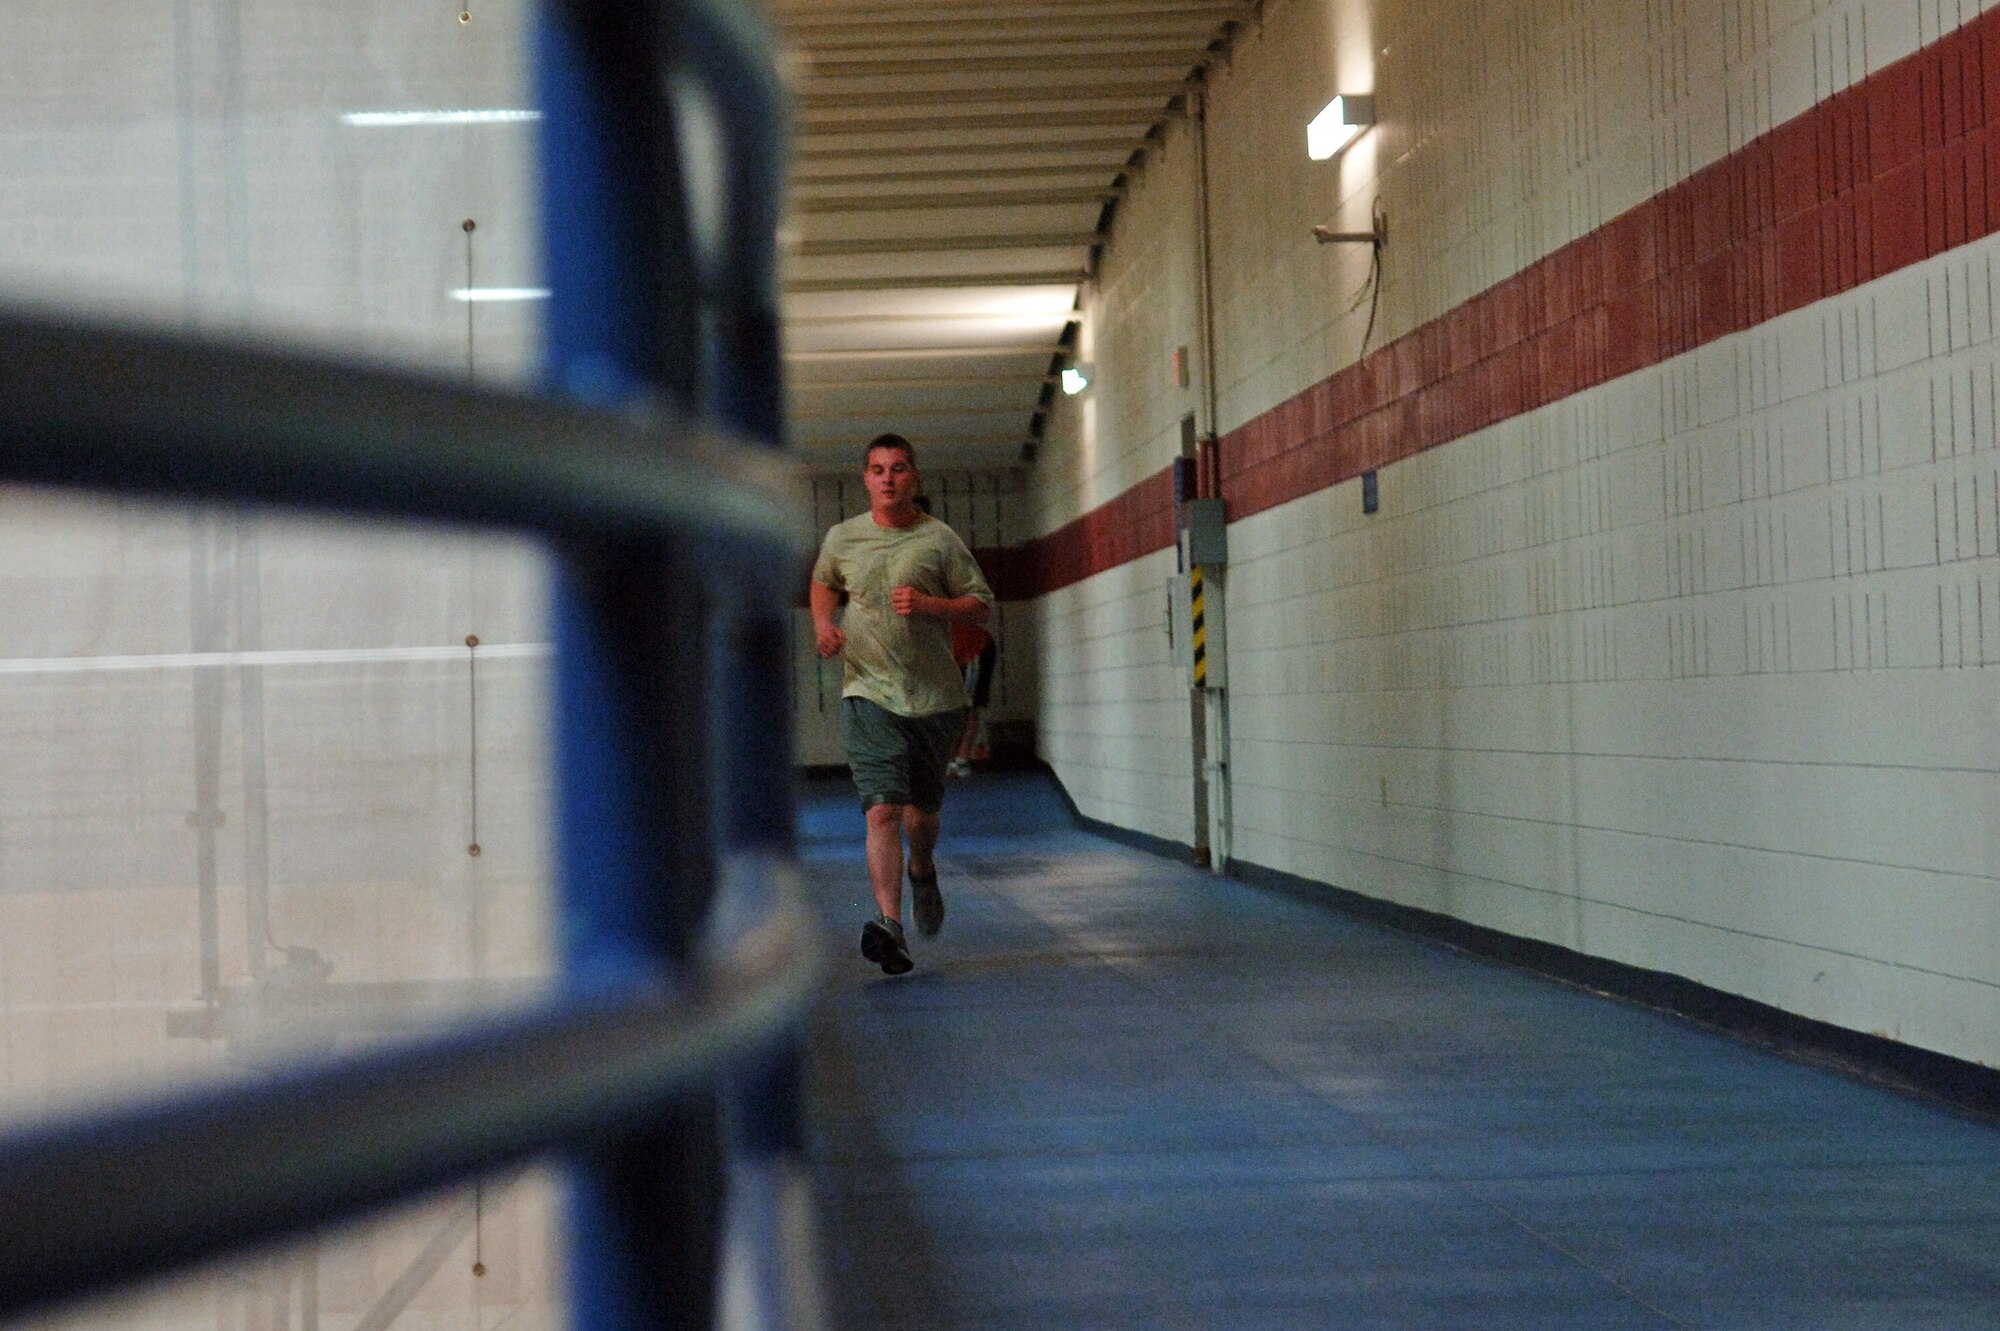 ELLSWORTH AIR FORCE BASE, S.D. – Airman 1st Class Jody Harding, 28th Maintenance Squadron trailer maintenance specialist, runs around the indoor track at the Bellamy Fitness Center, June 22. “I’m going to rock the new test,” said Airman Harding. “I can run the mile and a half in about 9:25 and max out my pushups and sit-ups, so I’ll definitely get a 90 or better.” (U.S. Air Force photo / Airman 1st Class Jarad A. Denton)